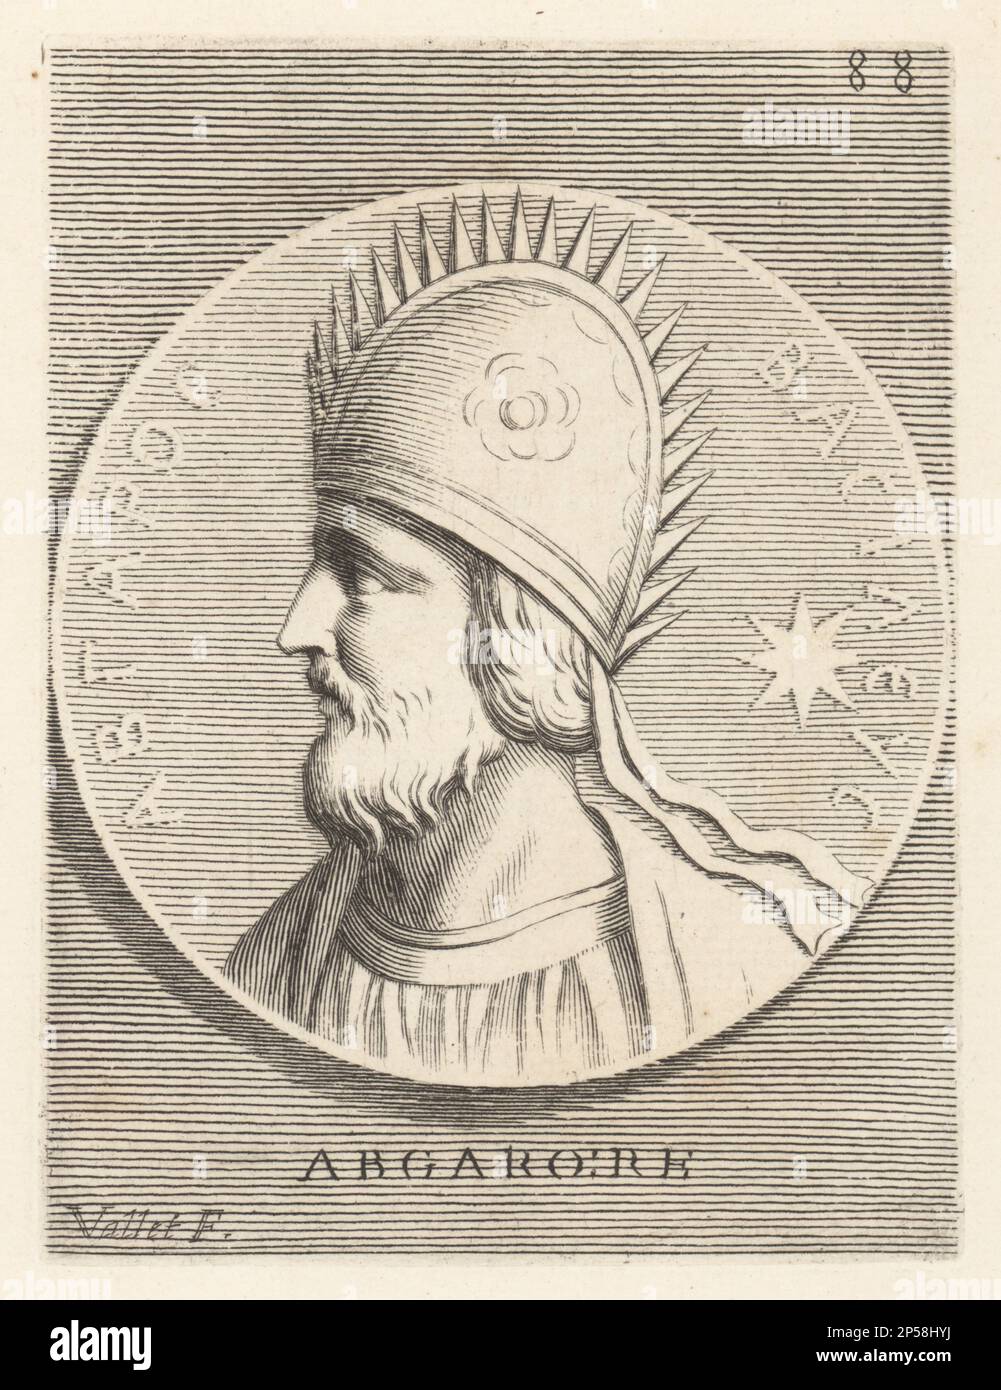 Abgar V, called Ukkama, King of Osroene, with his capital at Edessa (c. 1st century BC - 50 AD). One of the first Christian kings in history, converted by Thaddeus of Edessa. Abgaro Re. Copperplate engraving by Guillaume Vallet after Giovanni Angelo Canini from Iconografia, cioe disegni d'imagini de famosissimi monarchi, regi, filososi, poeti ed oratori dell' Antichita, Drawings of images of famous monarchs, kings, philosophers, poets and orators of Antiquity, Ignatio de’Lazari, Rome, 1699. Stock Photo